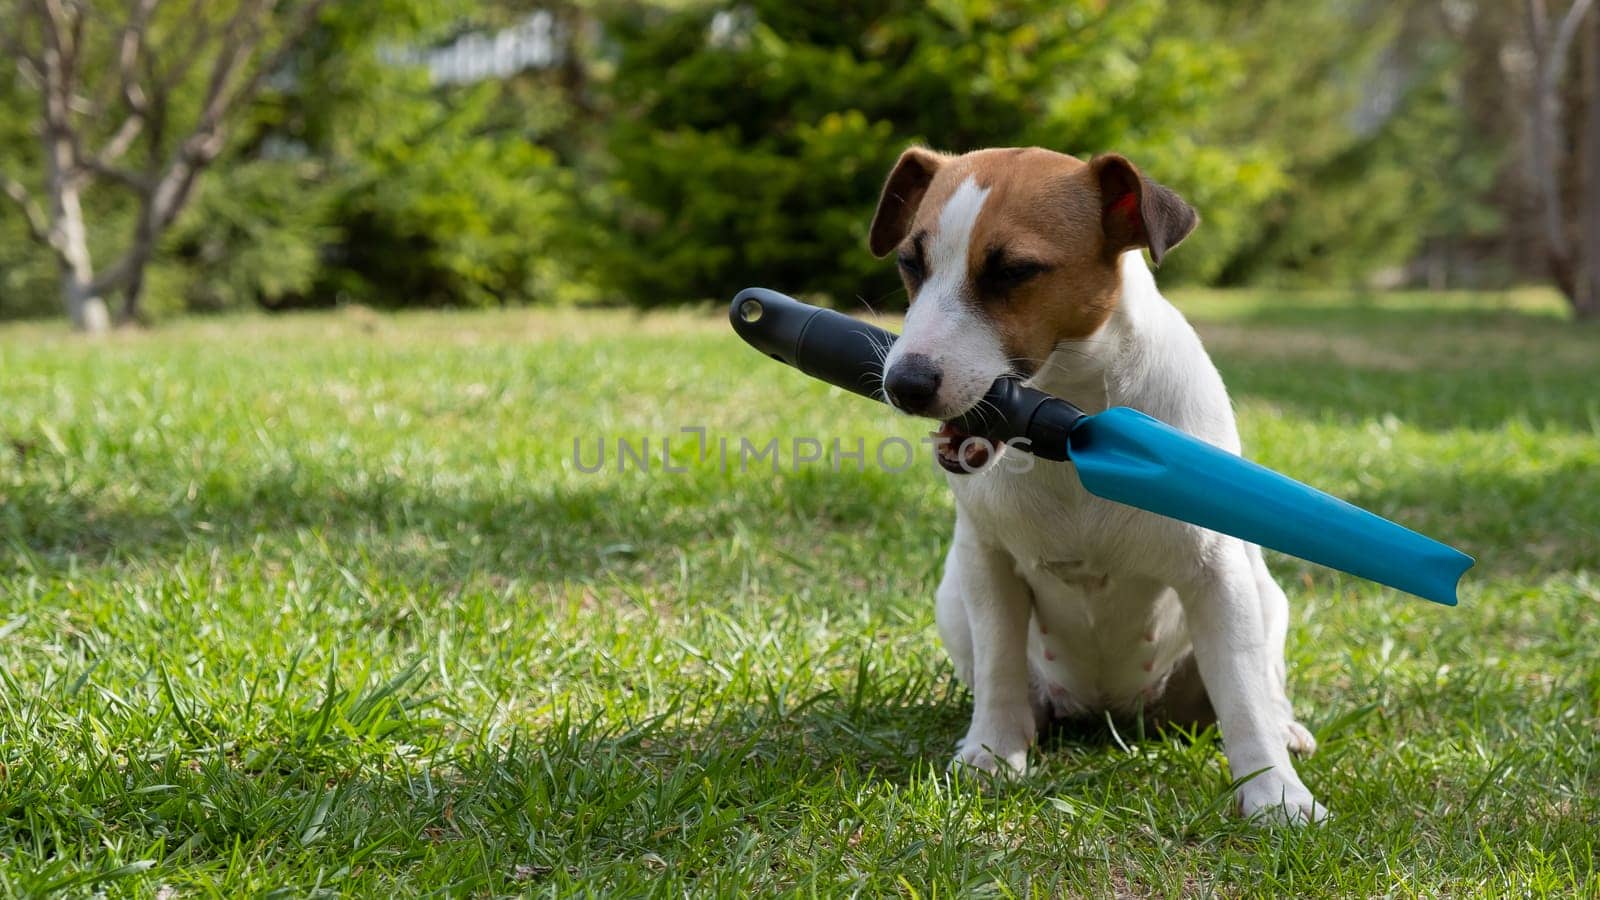 The dog holds the gardener's tool in his mouth on the lawn. Jack Russell Terrier is engaged in agriculture.